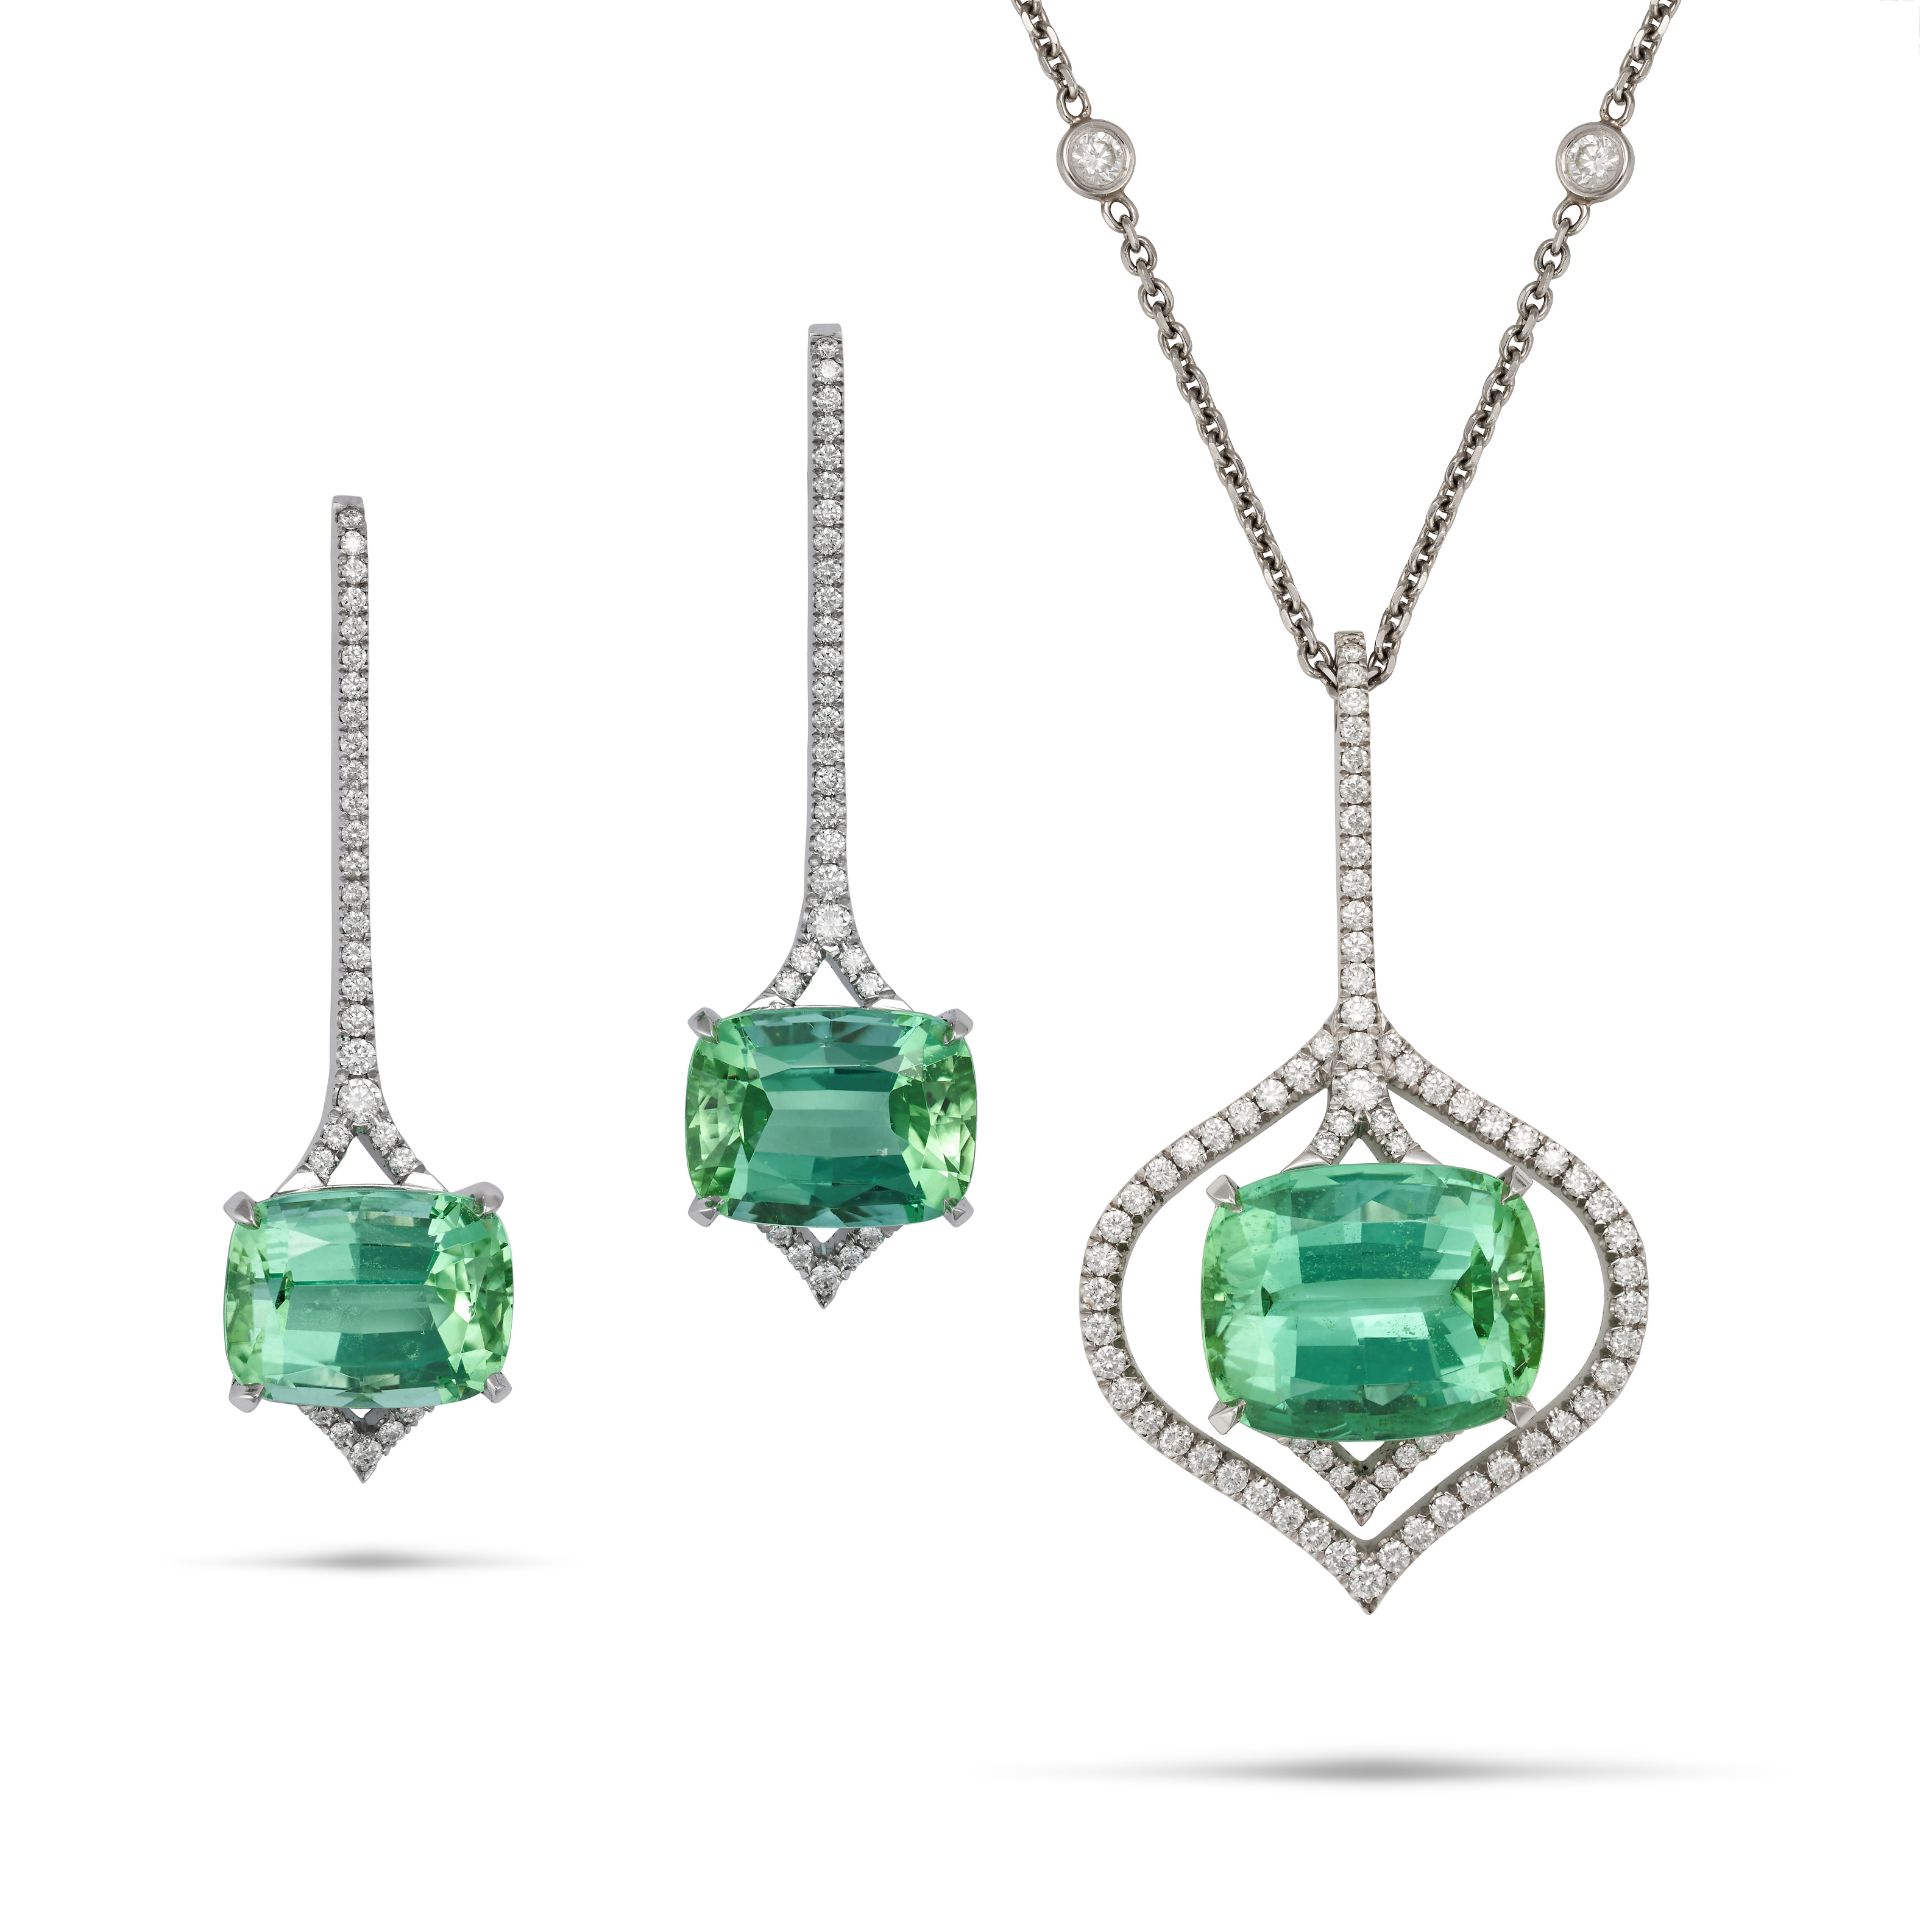 BOODLES, A GREEN TOURMALINE AND DIAMOND EARRINGS NECKLACE SUITE in platinum, the pendant set with...